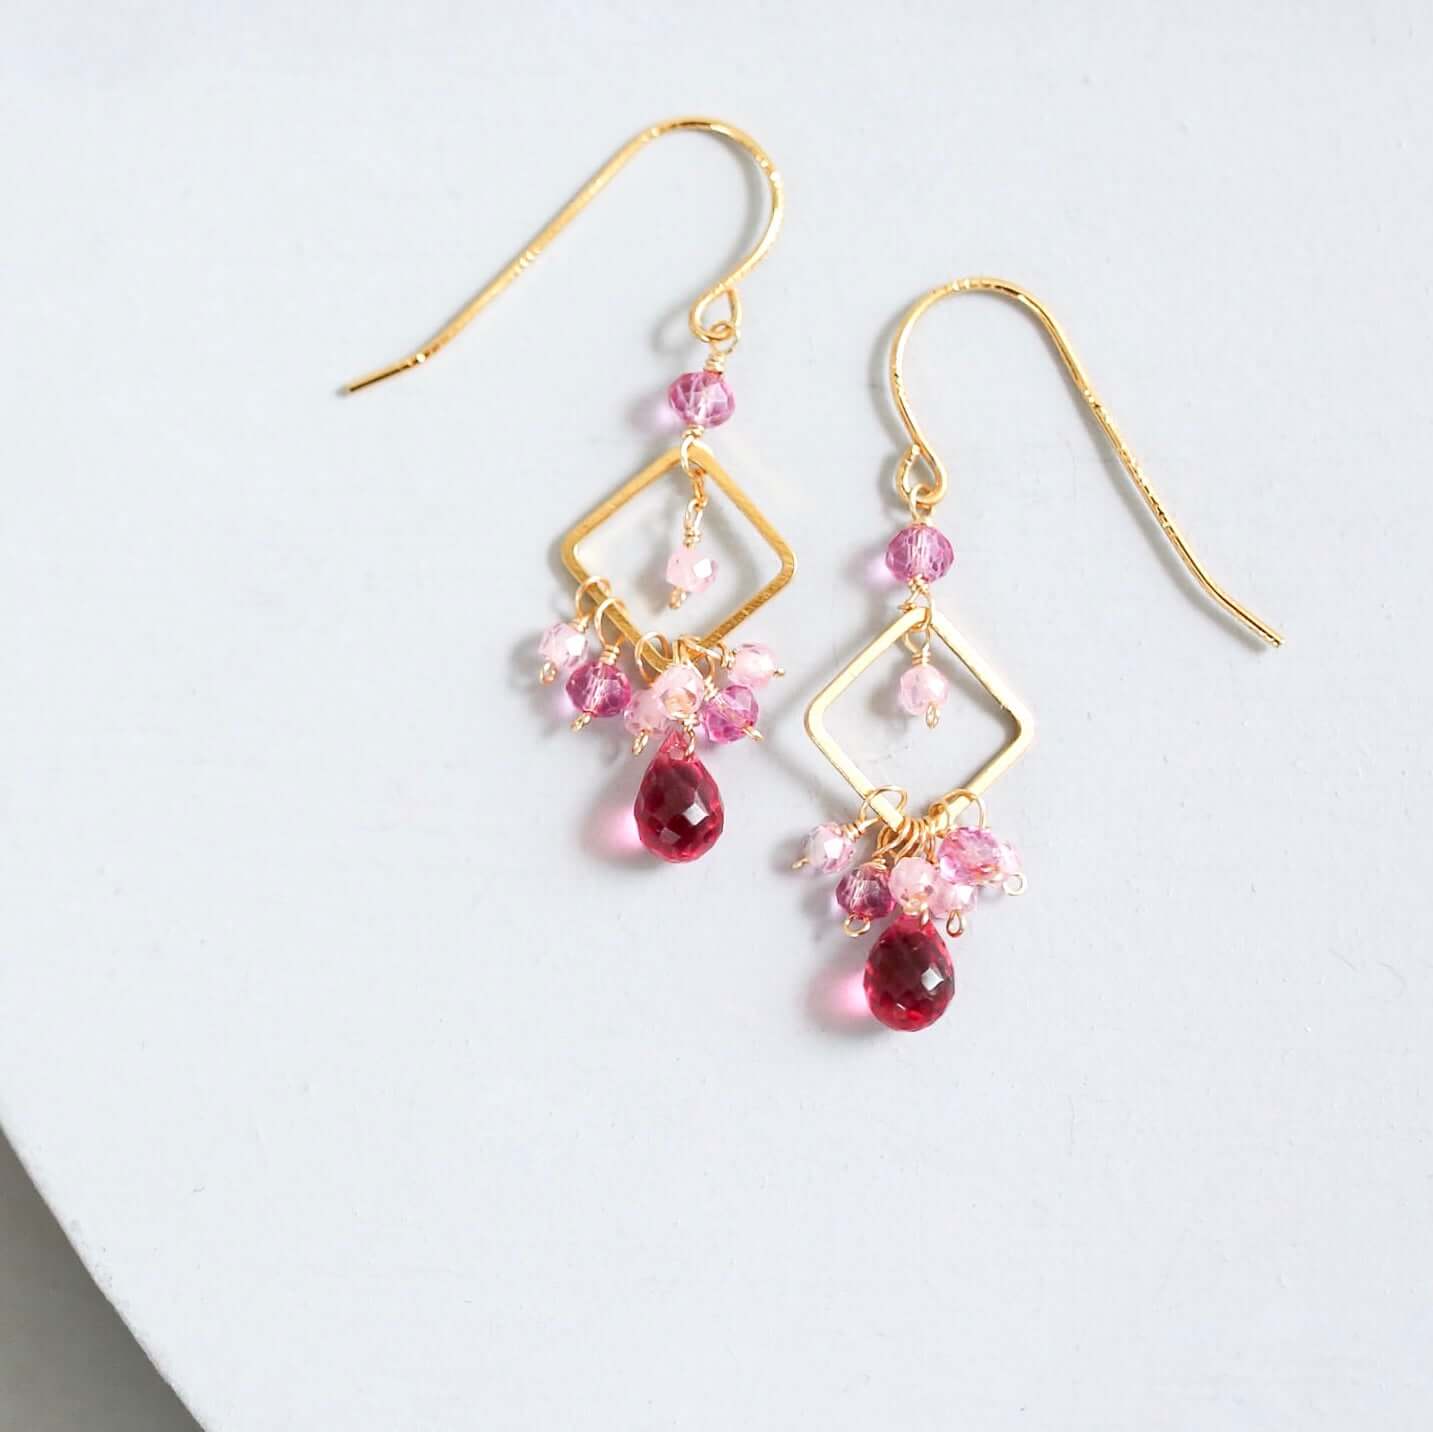 Dark Pink Tourmaline briolettes with rose quartz and pink tourmaline gemstones Accent French Hook Gold Earrings 